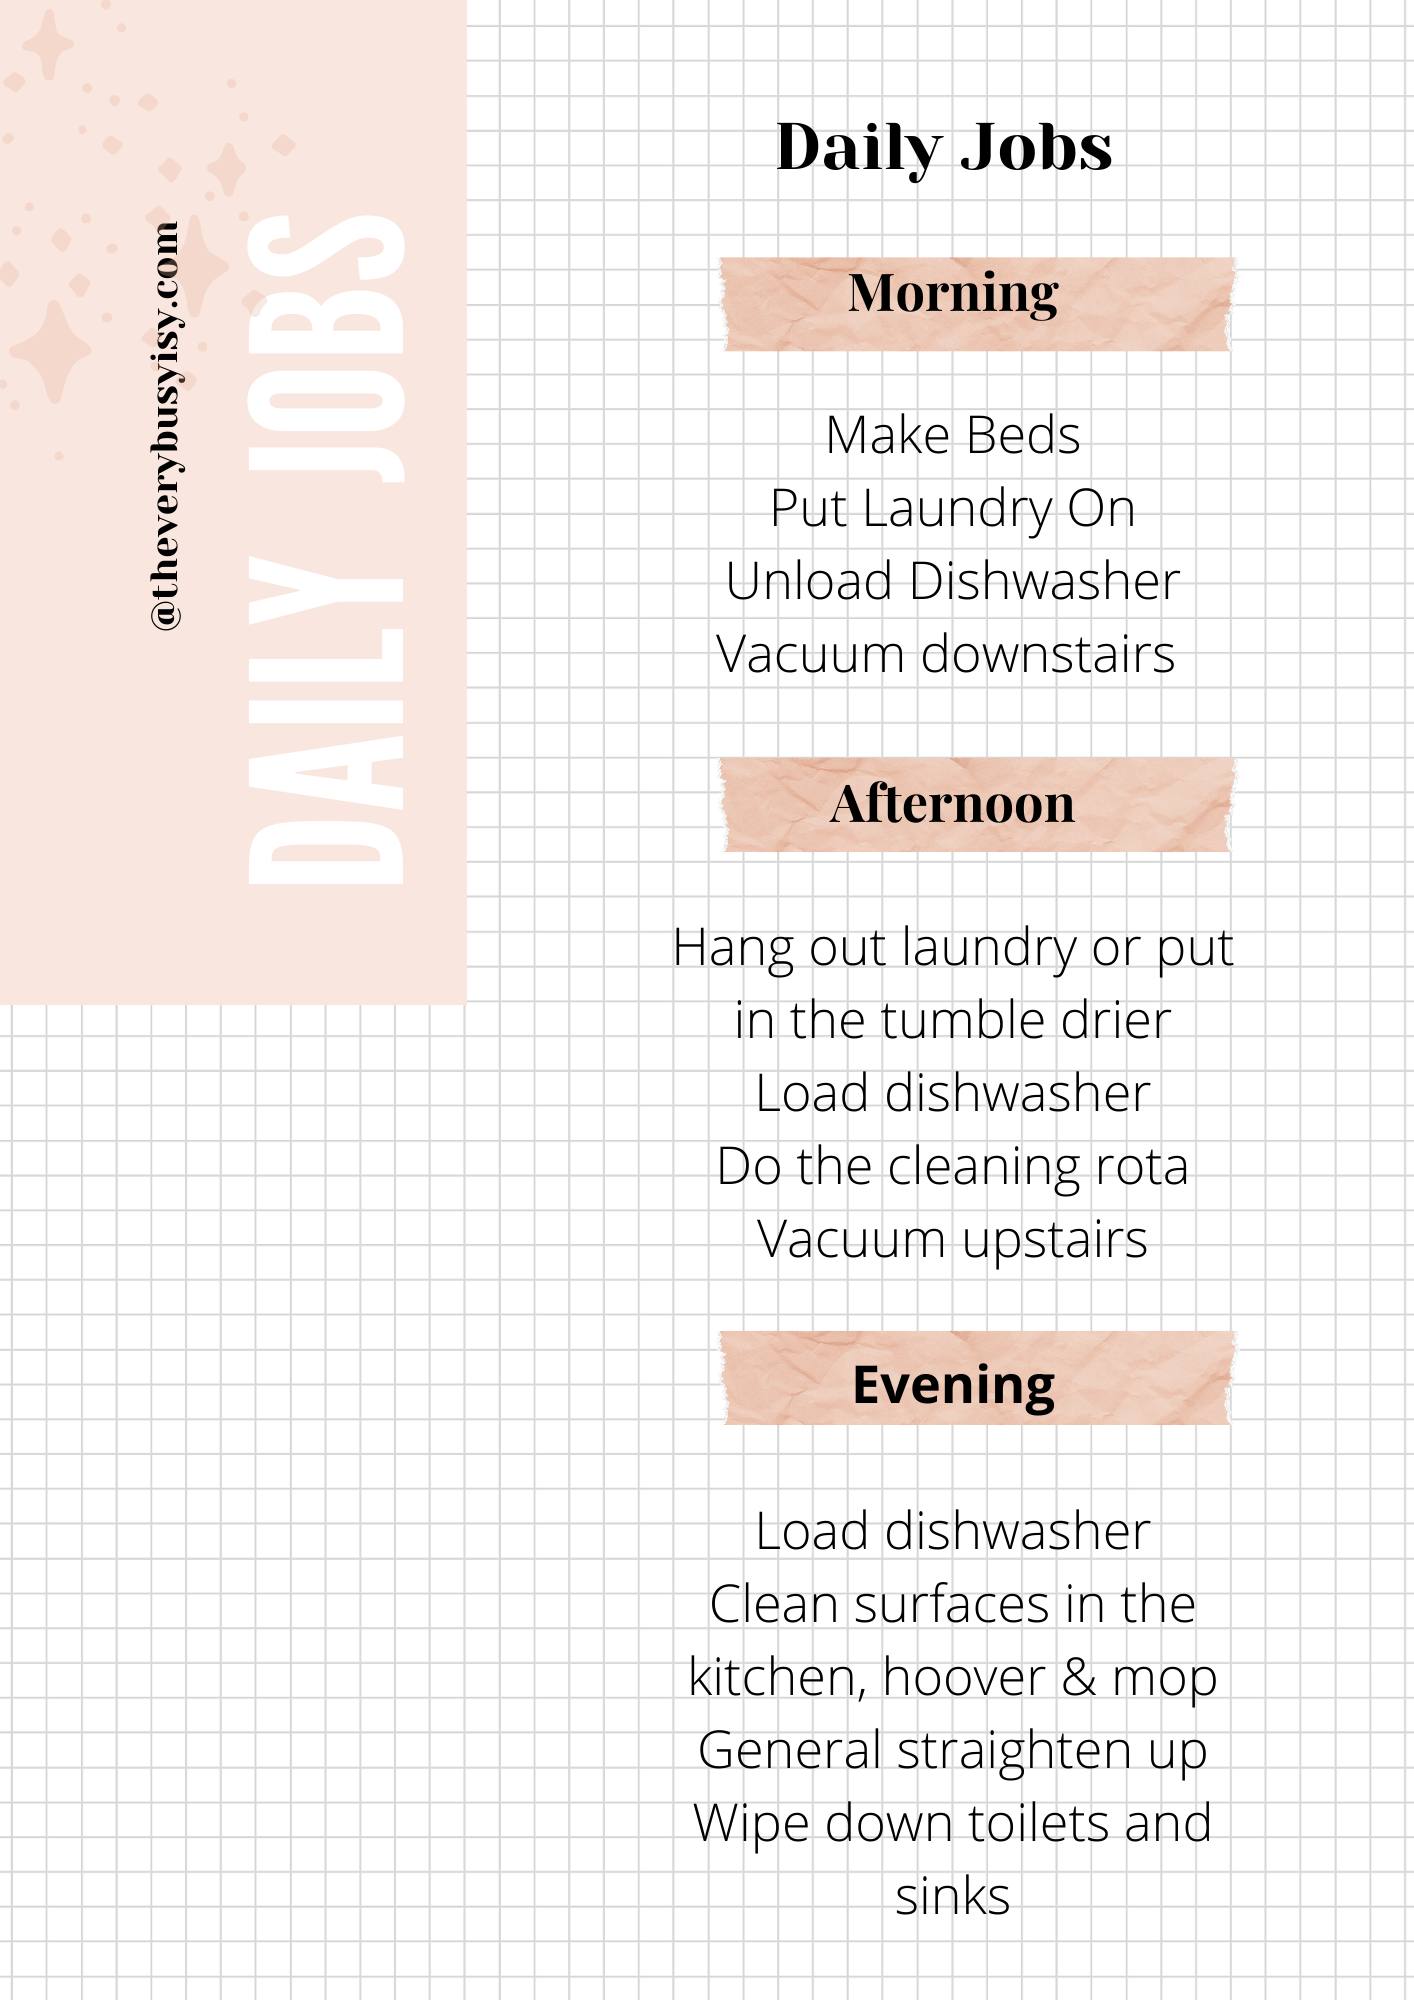 cleaning rota daily jobs